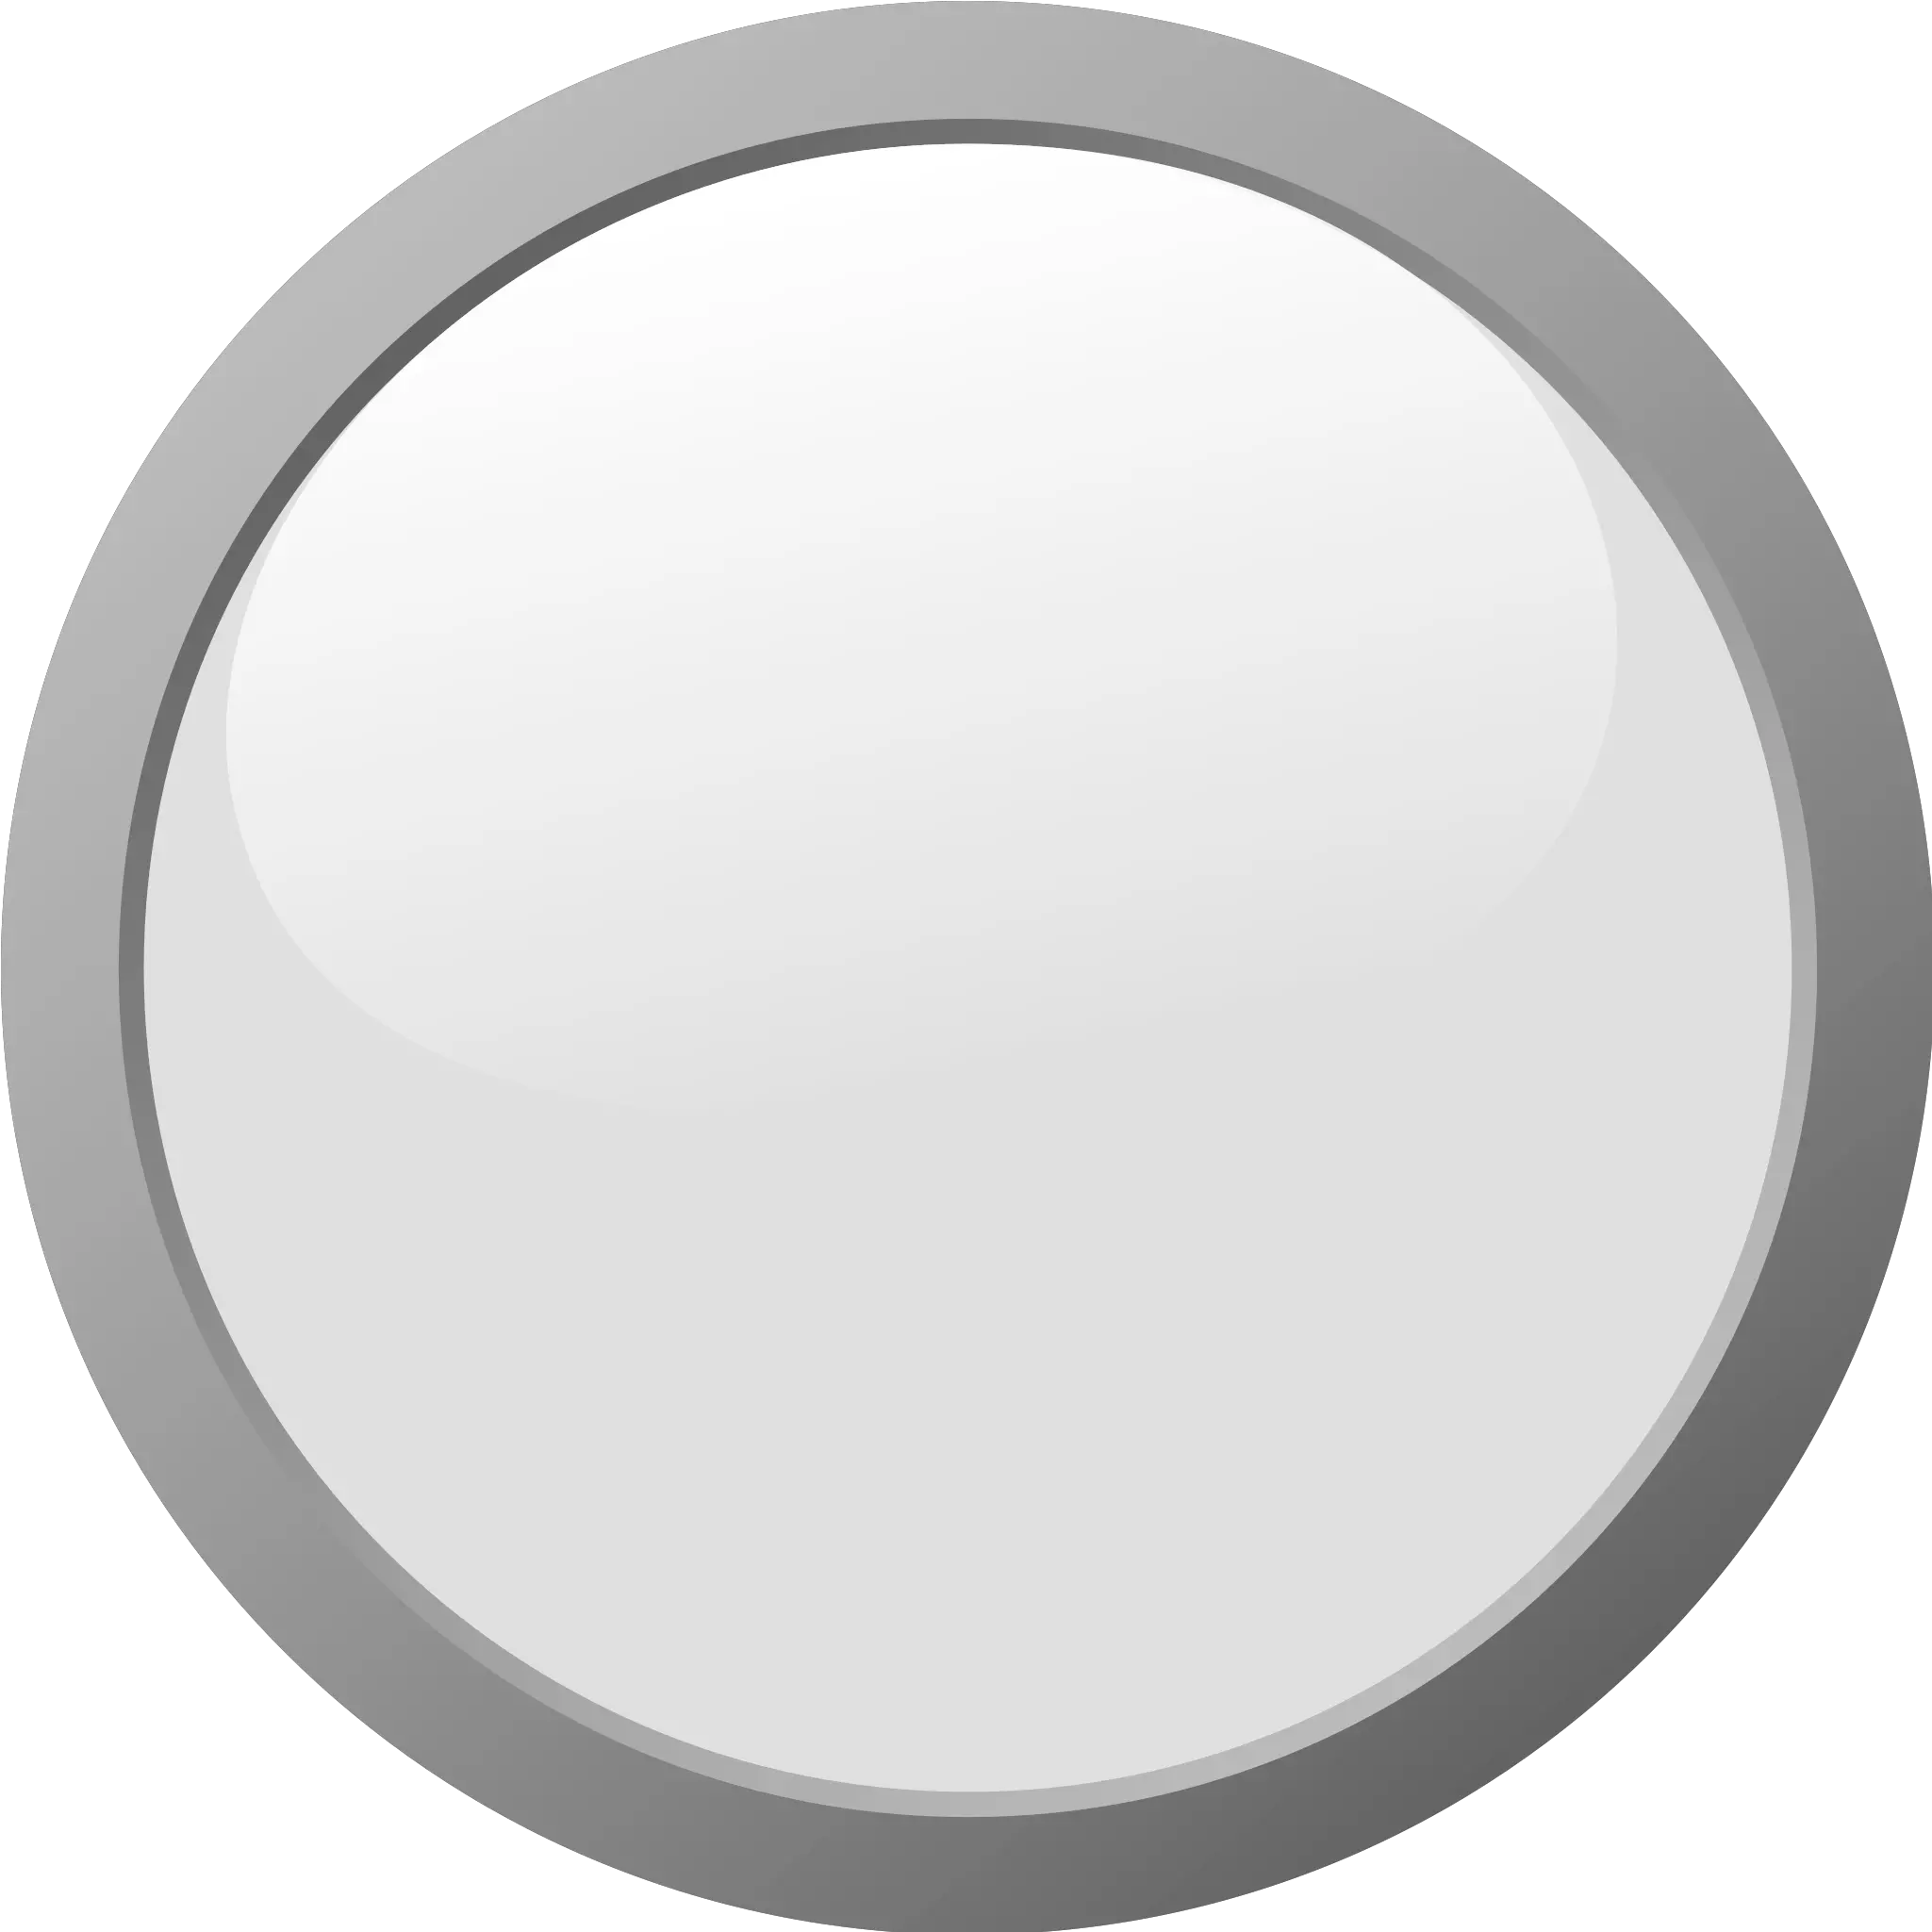 Filegray Light Iconsvg Wikimedia Commons Solid Png Lamp Icon